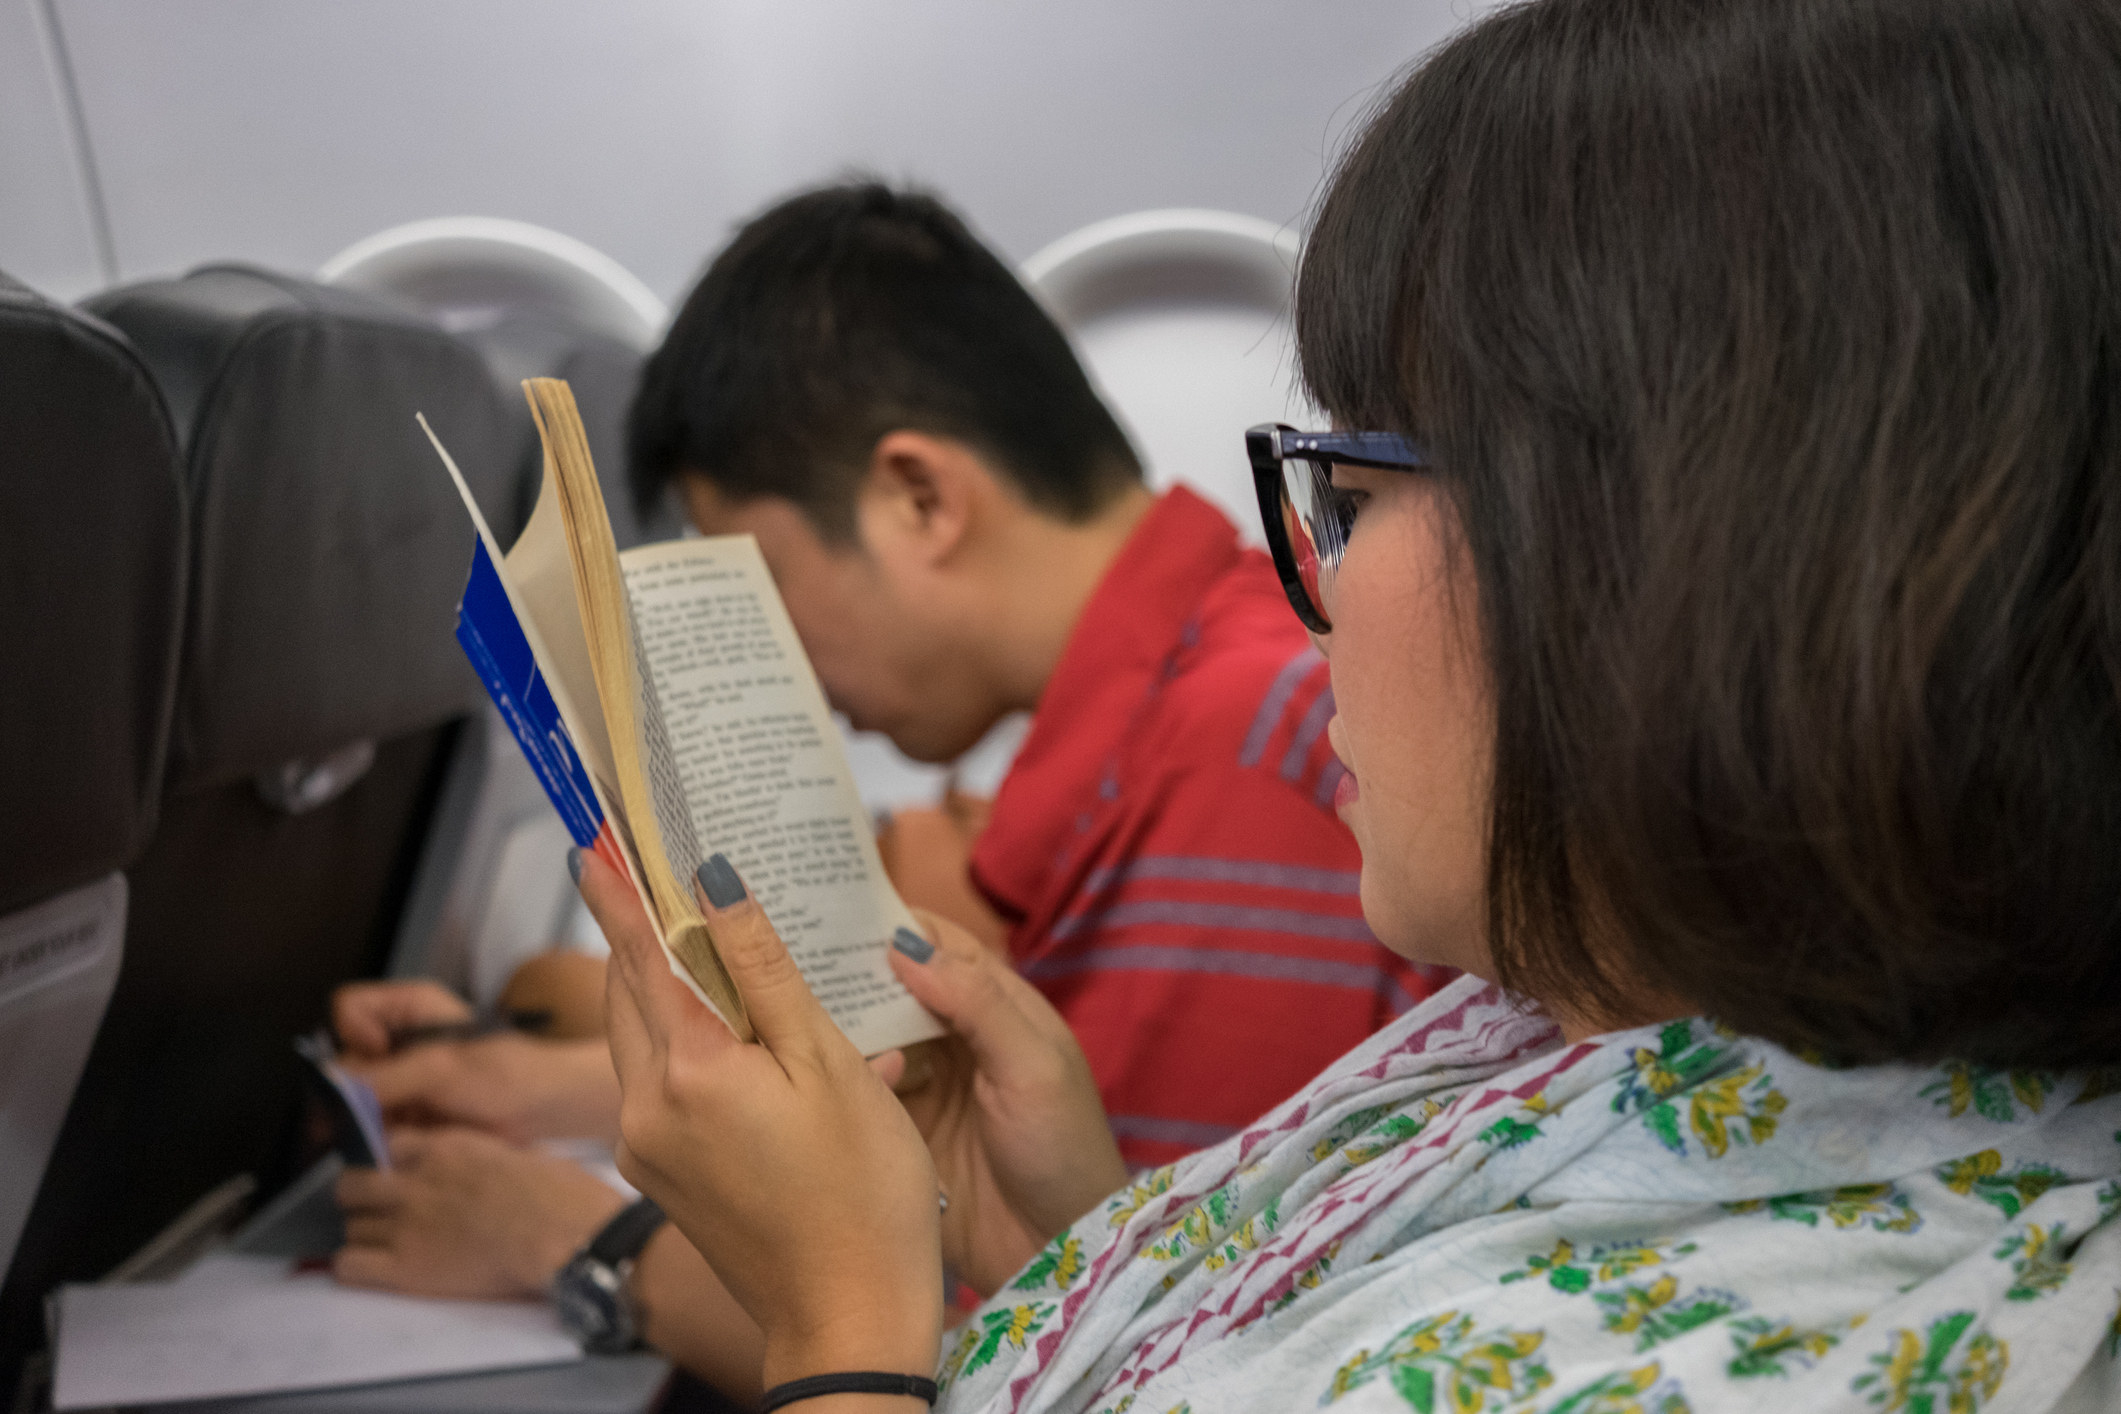 A woman reading a book on a plane